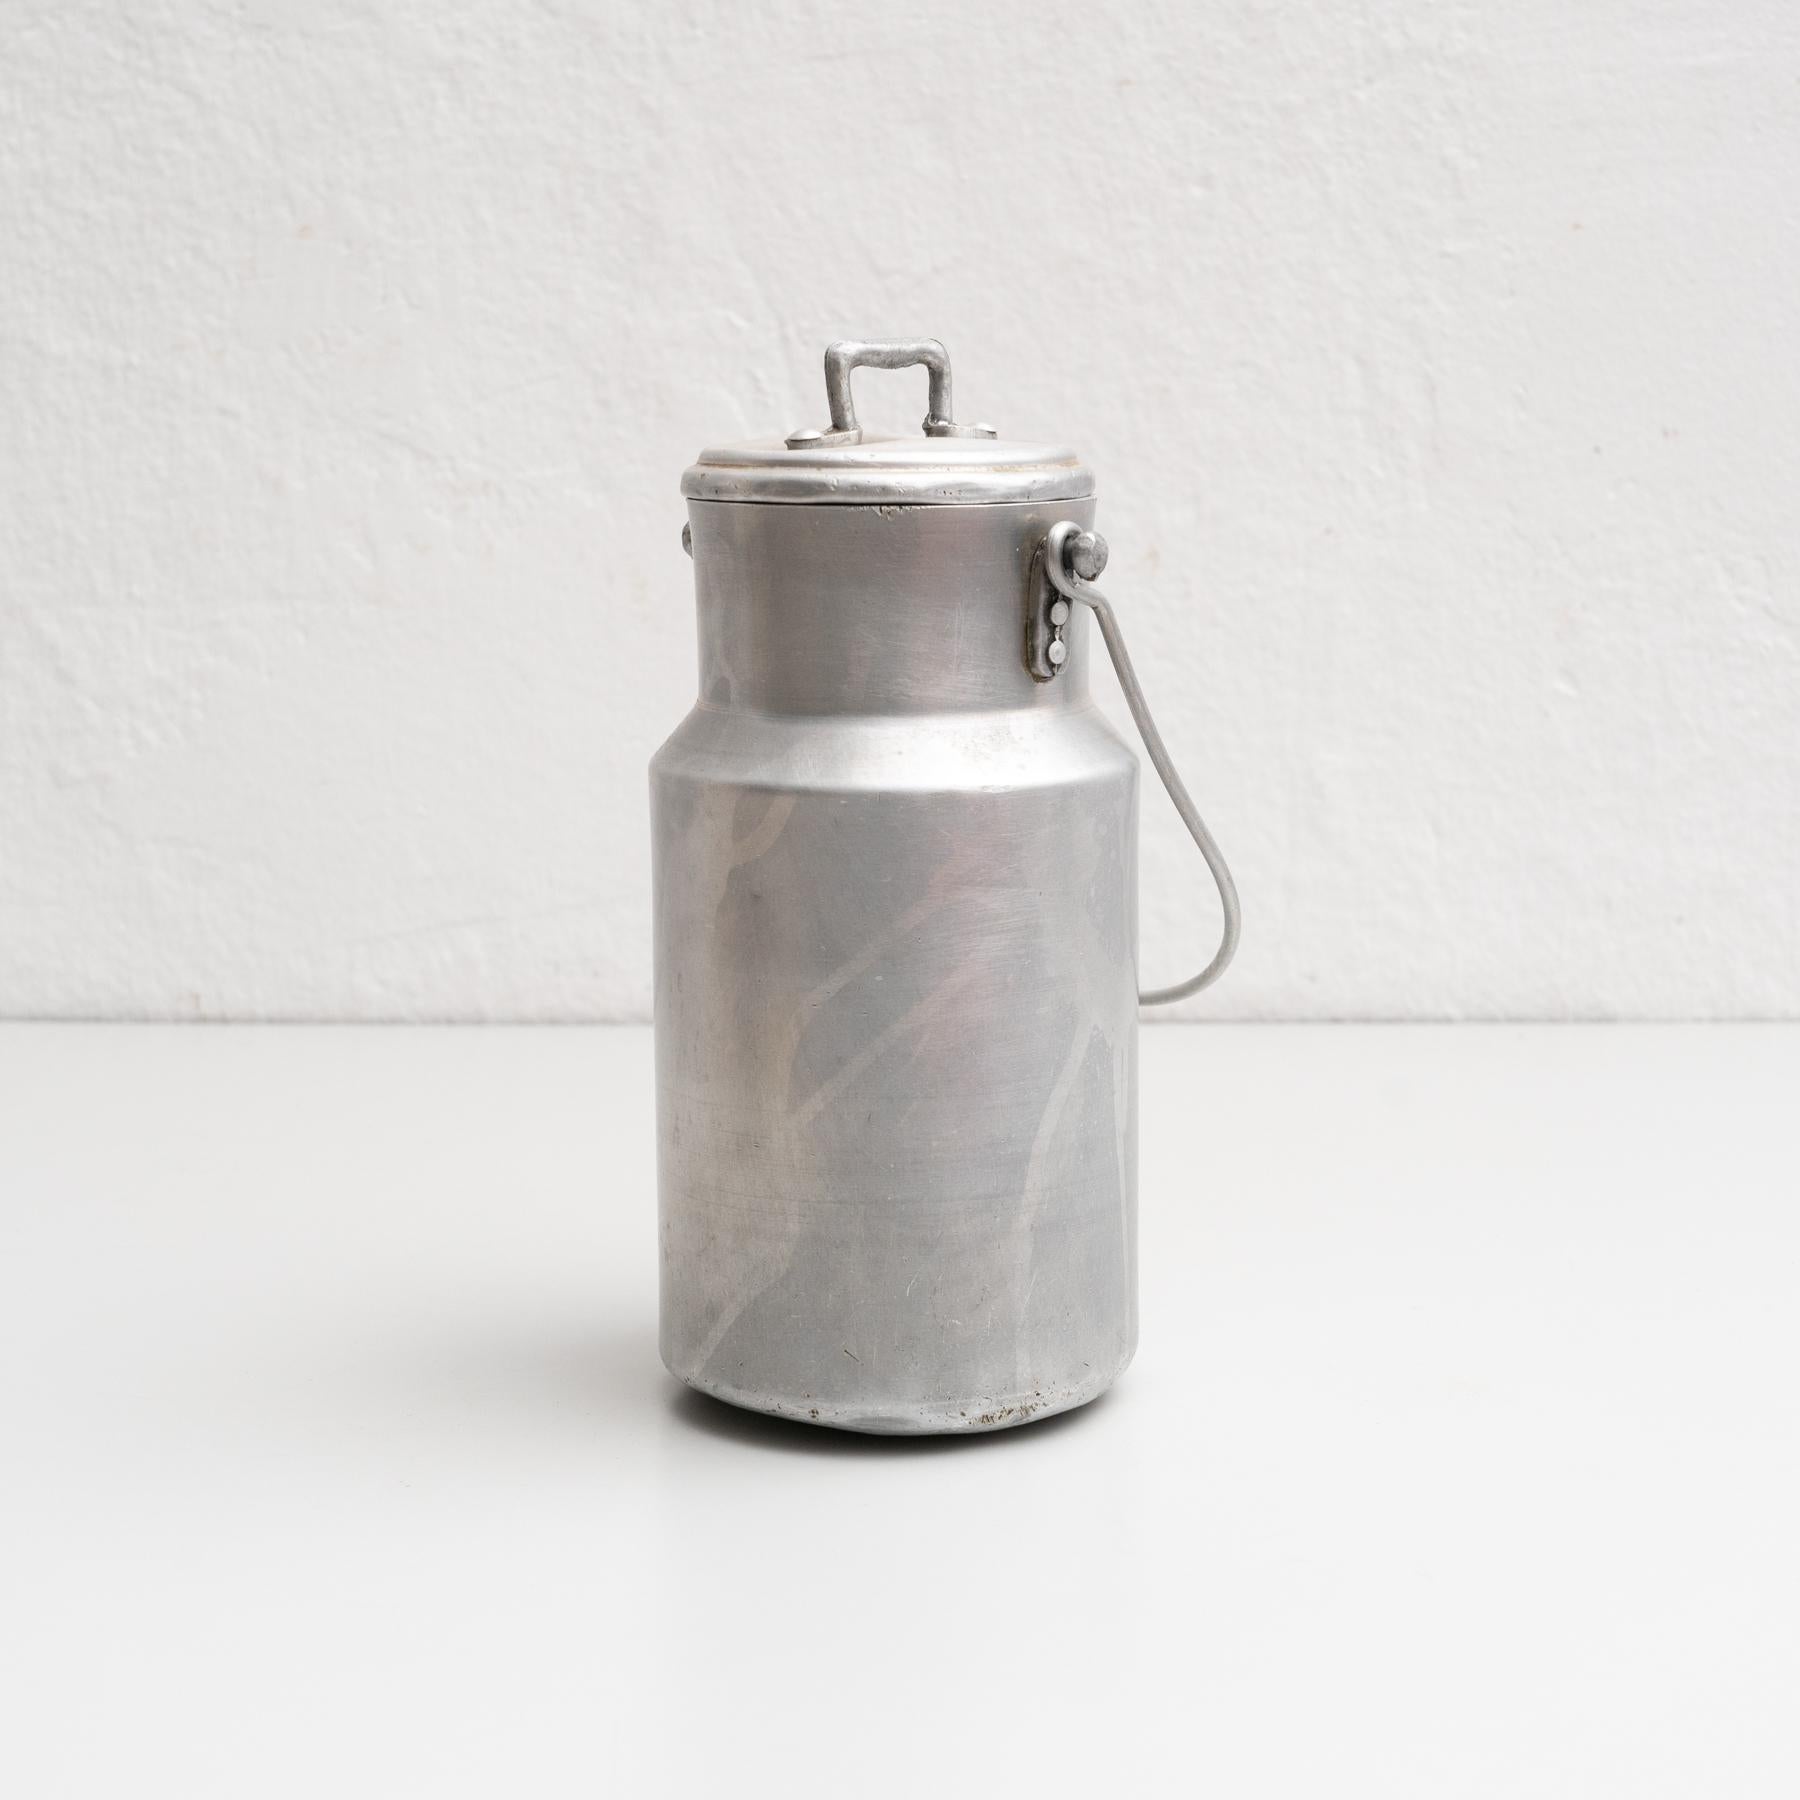 Vintage metal lidded milk pot with a handle.

By unknown manufacturer, made in Spain, circa 1950.

In original condition, with minor wear consistent with age and use, preserving a beautiful patina.

Materials:
Metal.